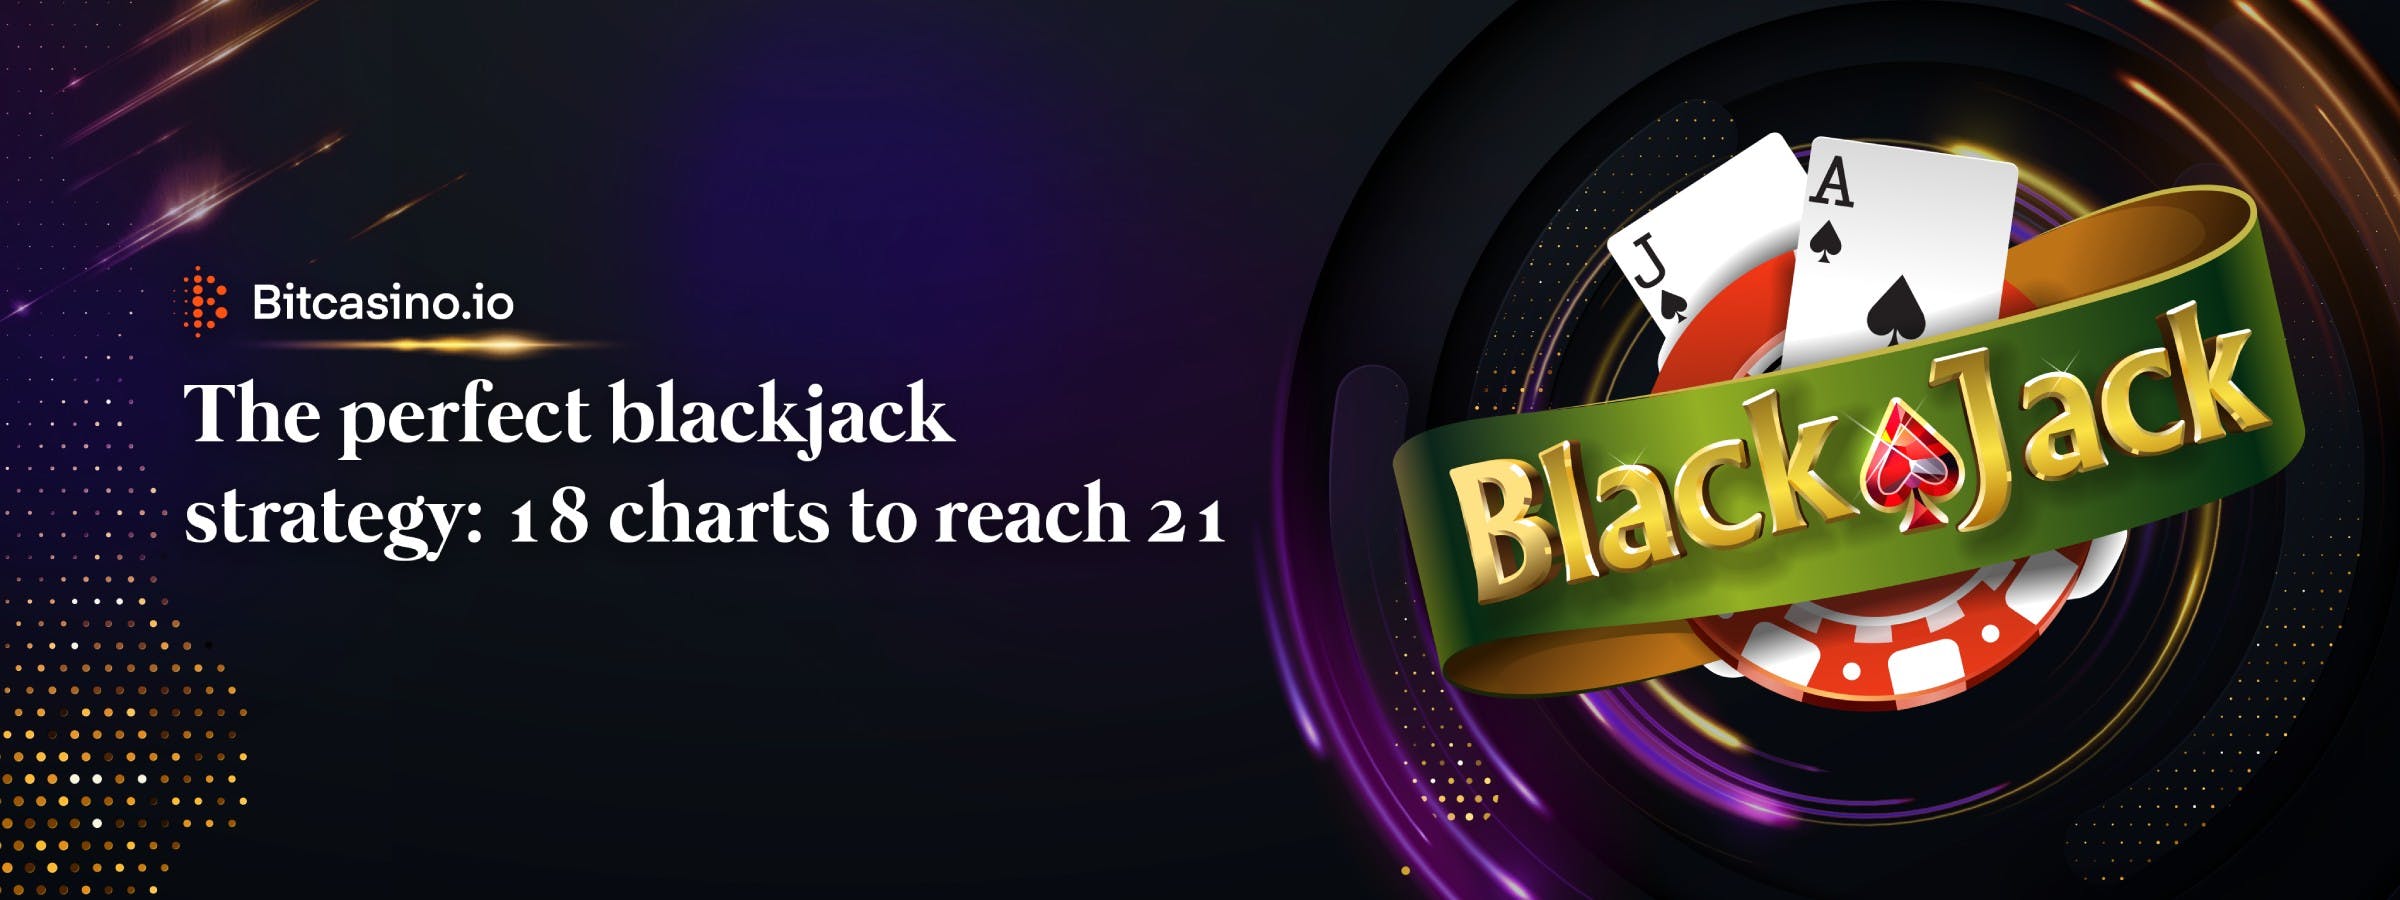 The perfect blackjack strategy: 18 charts to reach 21